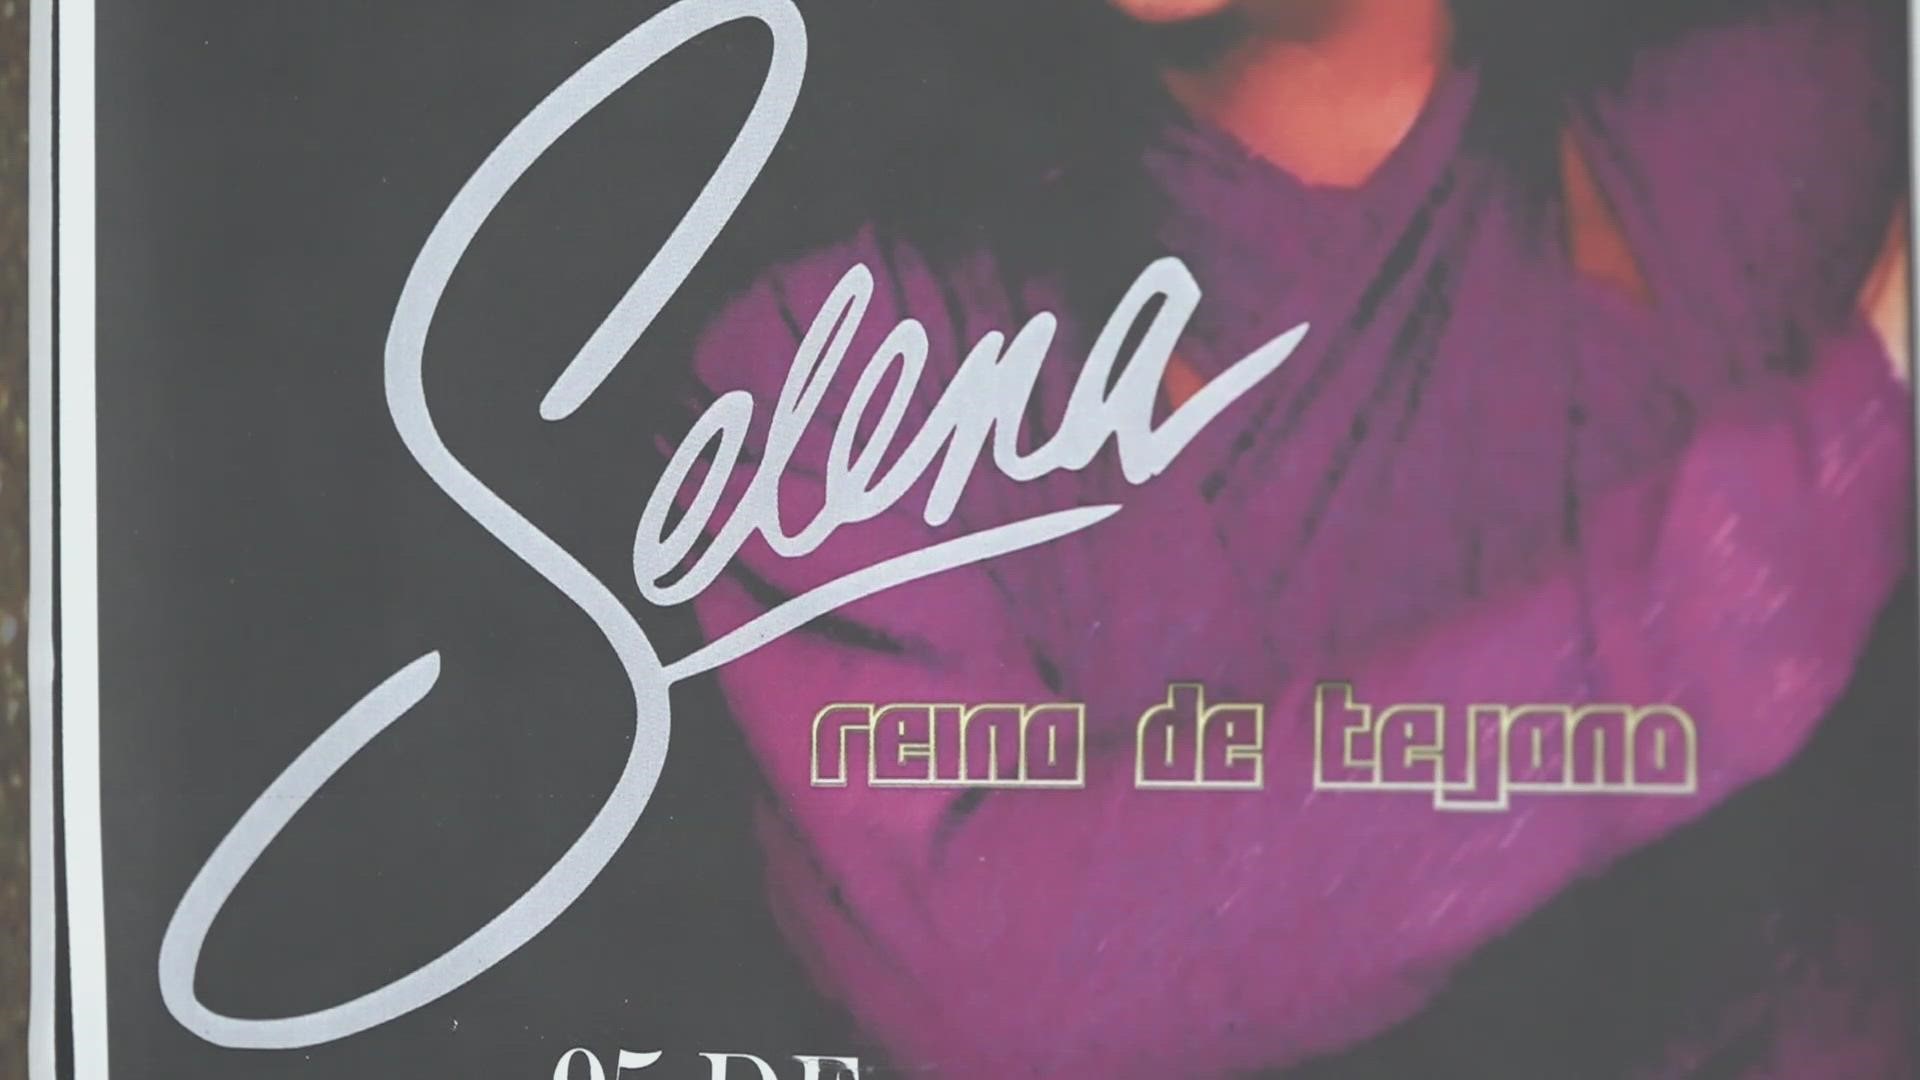 The sounds of Tejano music will be heard in East Tennessee. The theater is bringing the life of Selena to the city to bring more Latino entertainment opportunities.